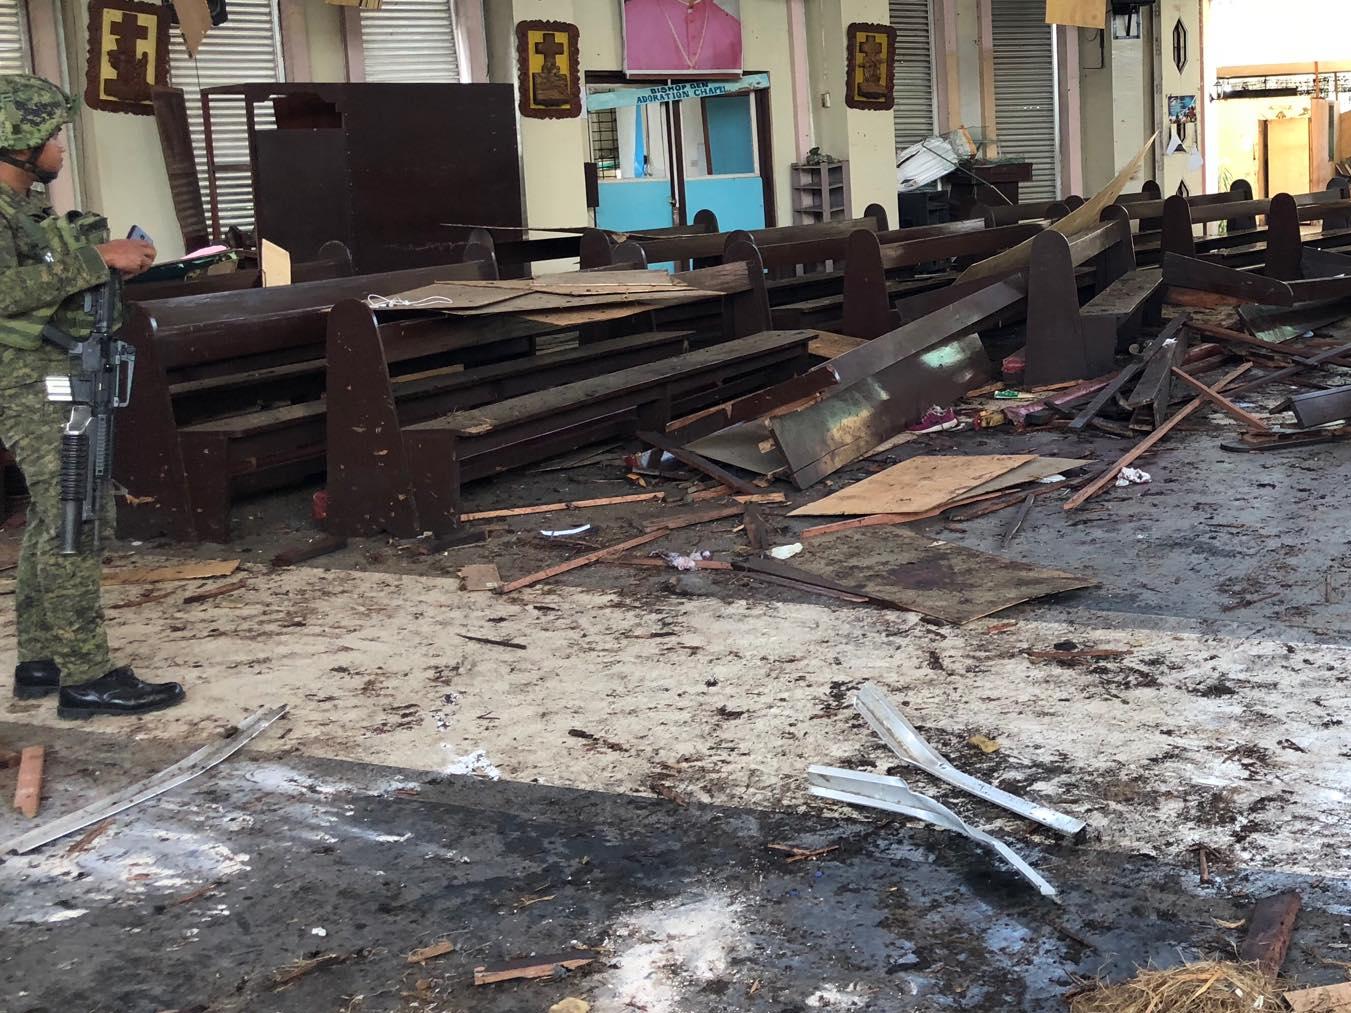 Philippines interior minister says, Indonesian couple behind church attack on 27 Jan